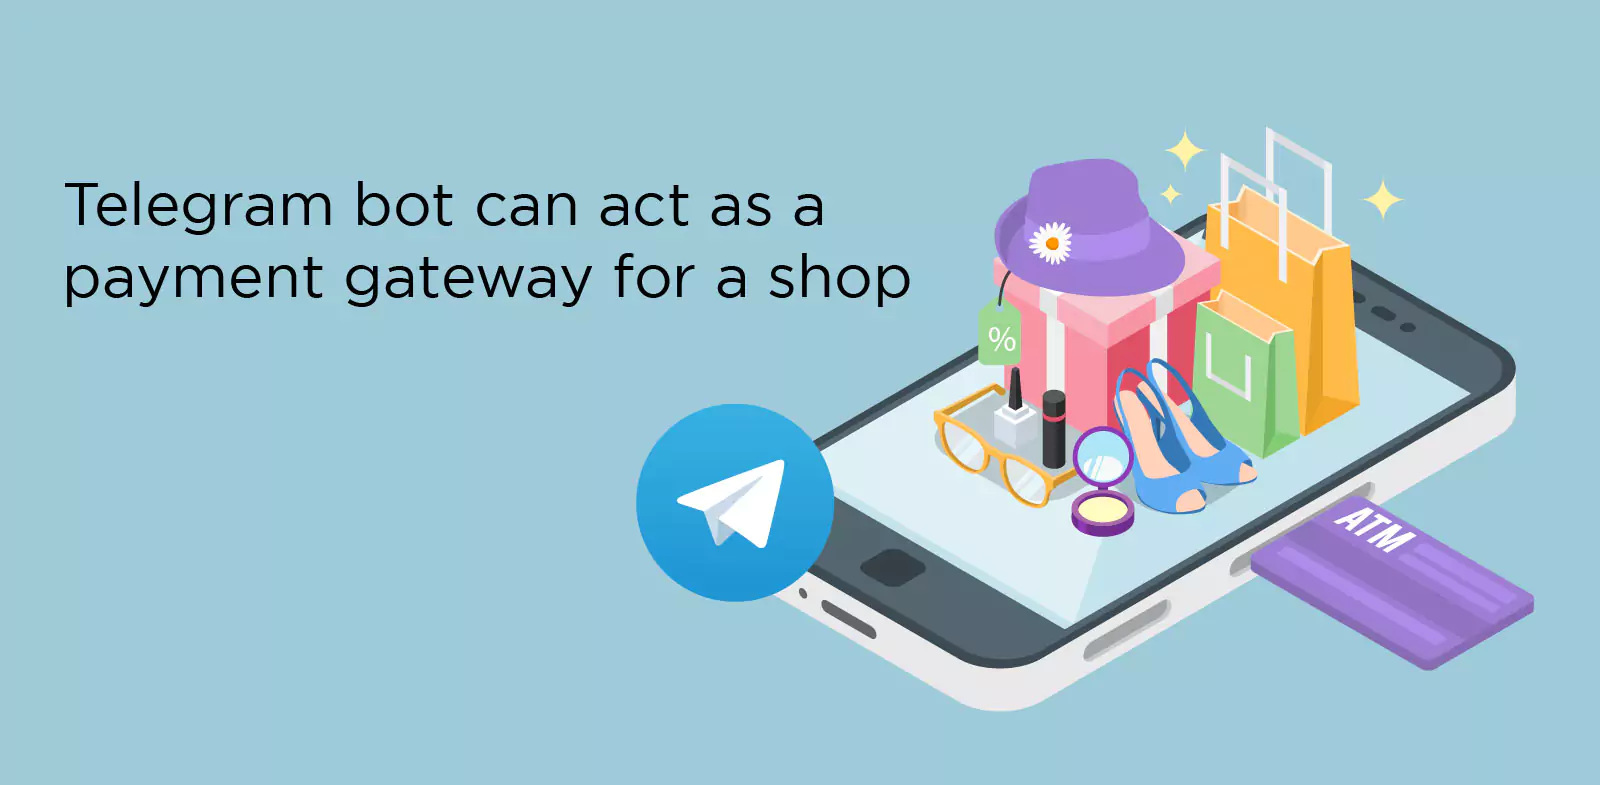 Telegram bot can act as a payment gateway for a shop